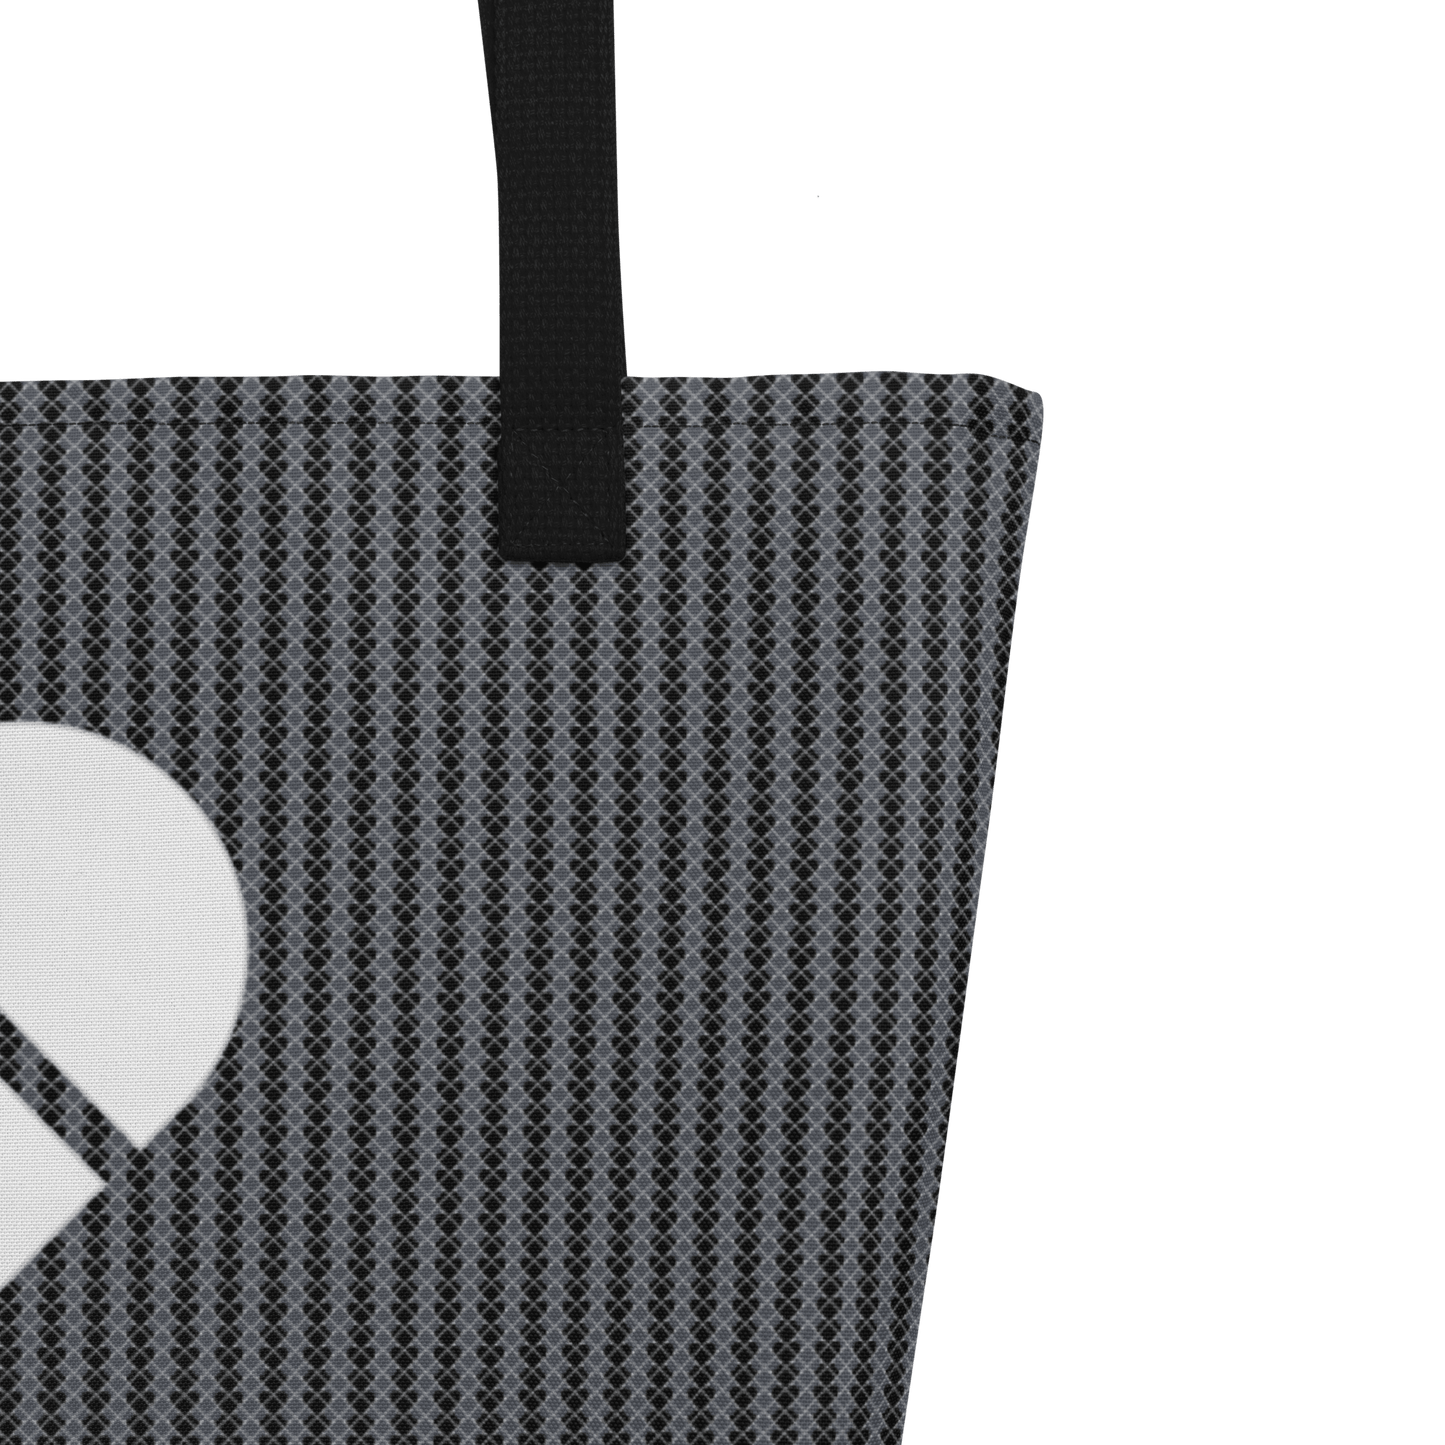 Love-Infused Tote Bags - The Lovogram Tote by CRiZ AMOR, details